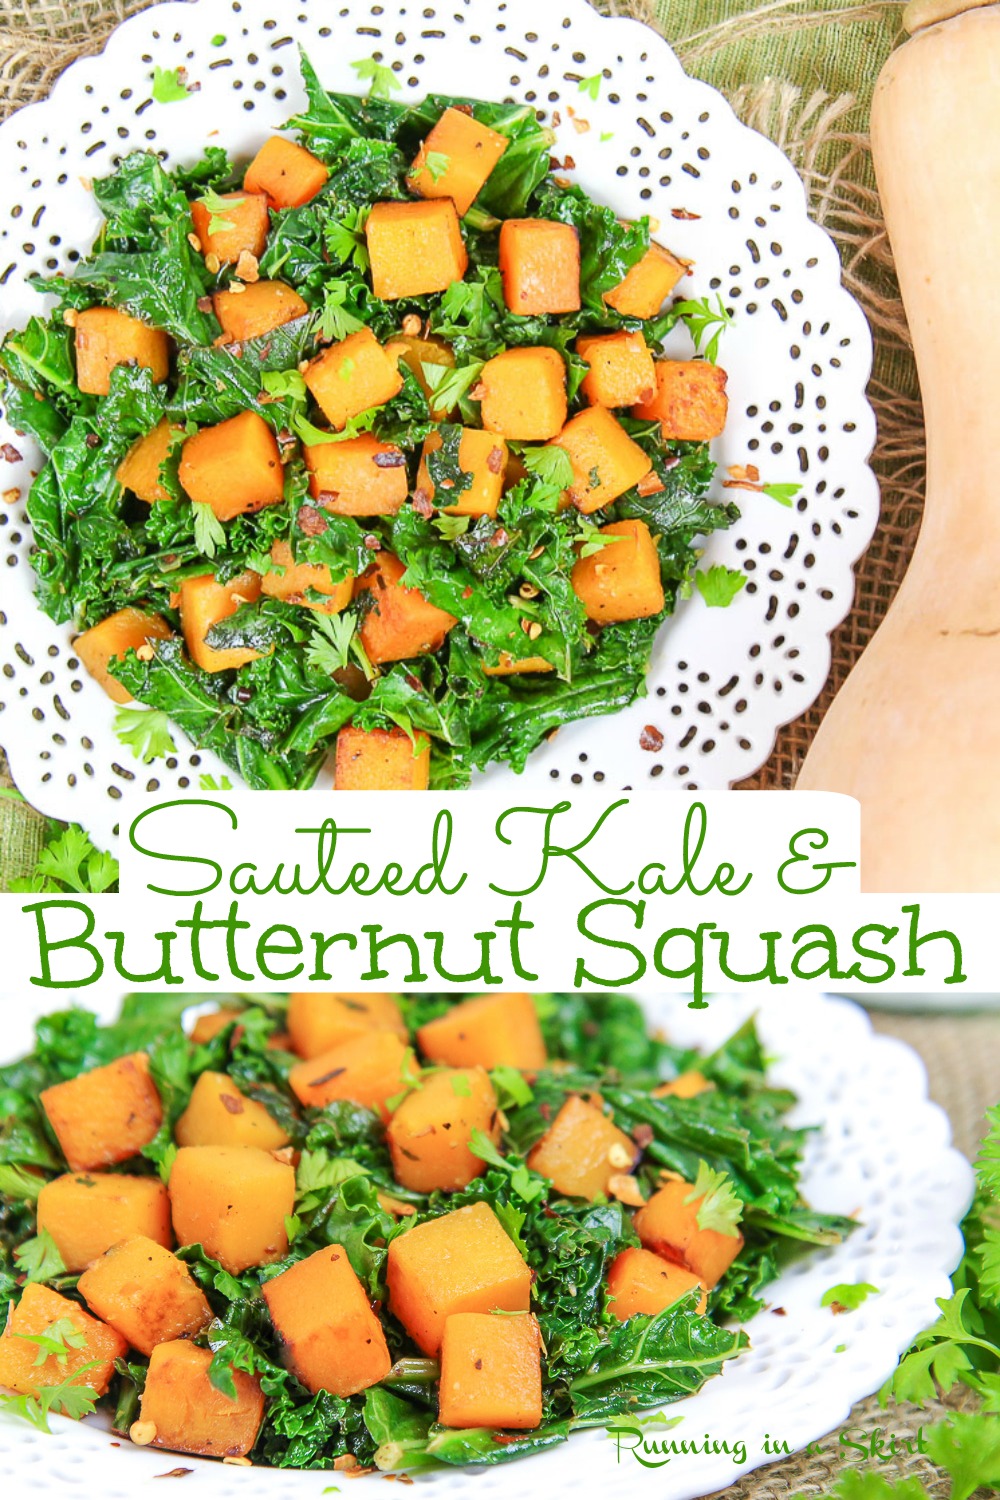 Sauteed Kale & Butternut Squash recipe - Vegetarian or Vegan Side Dish for Thanksgiving or Fall. Includes step by step how to cook instructions. Use as a side dish, on top of a grain bowl, or even filling for a wrap or quesadilla. Vegan, Vegetarian, Gluten Free, Keto / Running in a Skirt #thanksgiving #vegetarian #sidedish #kale #healthy #healthyliving via @juliewunder